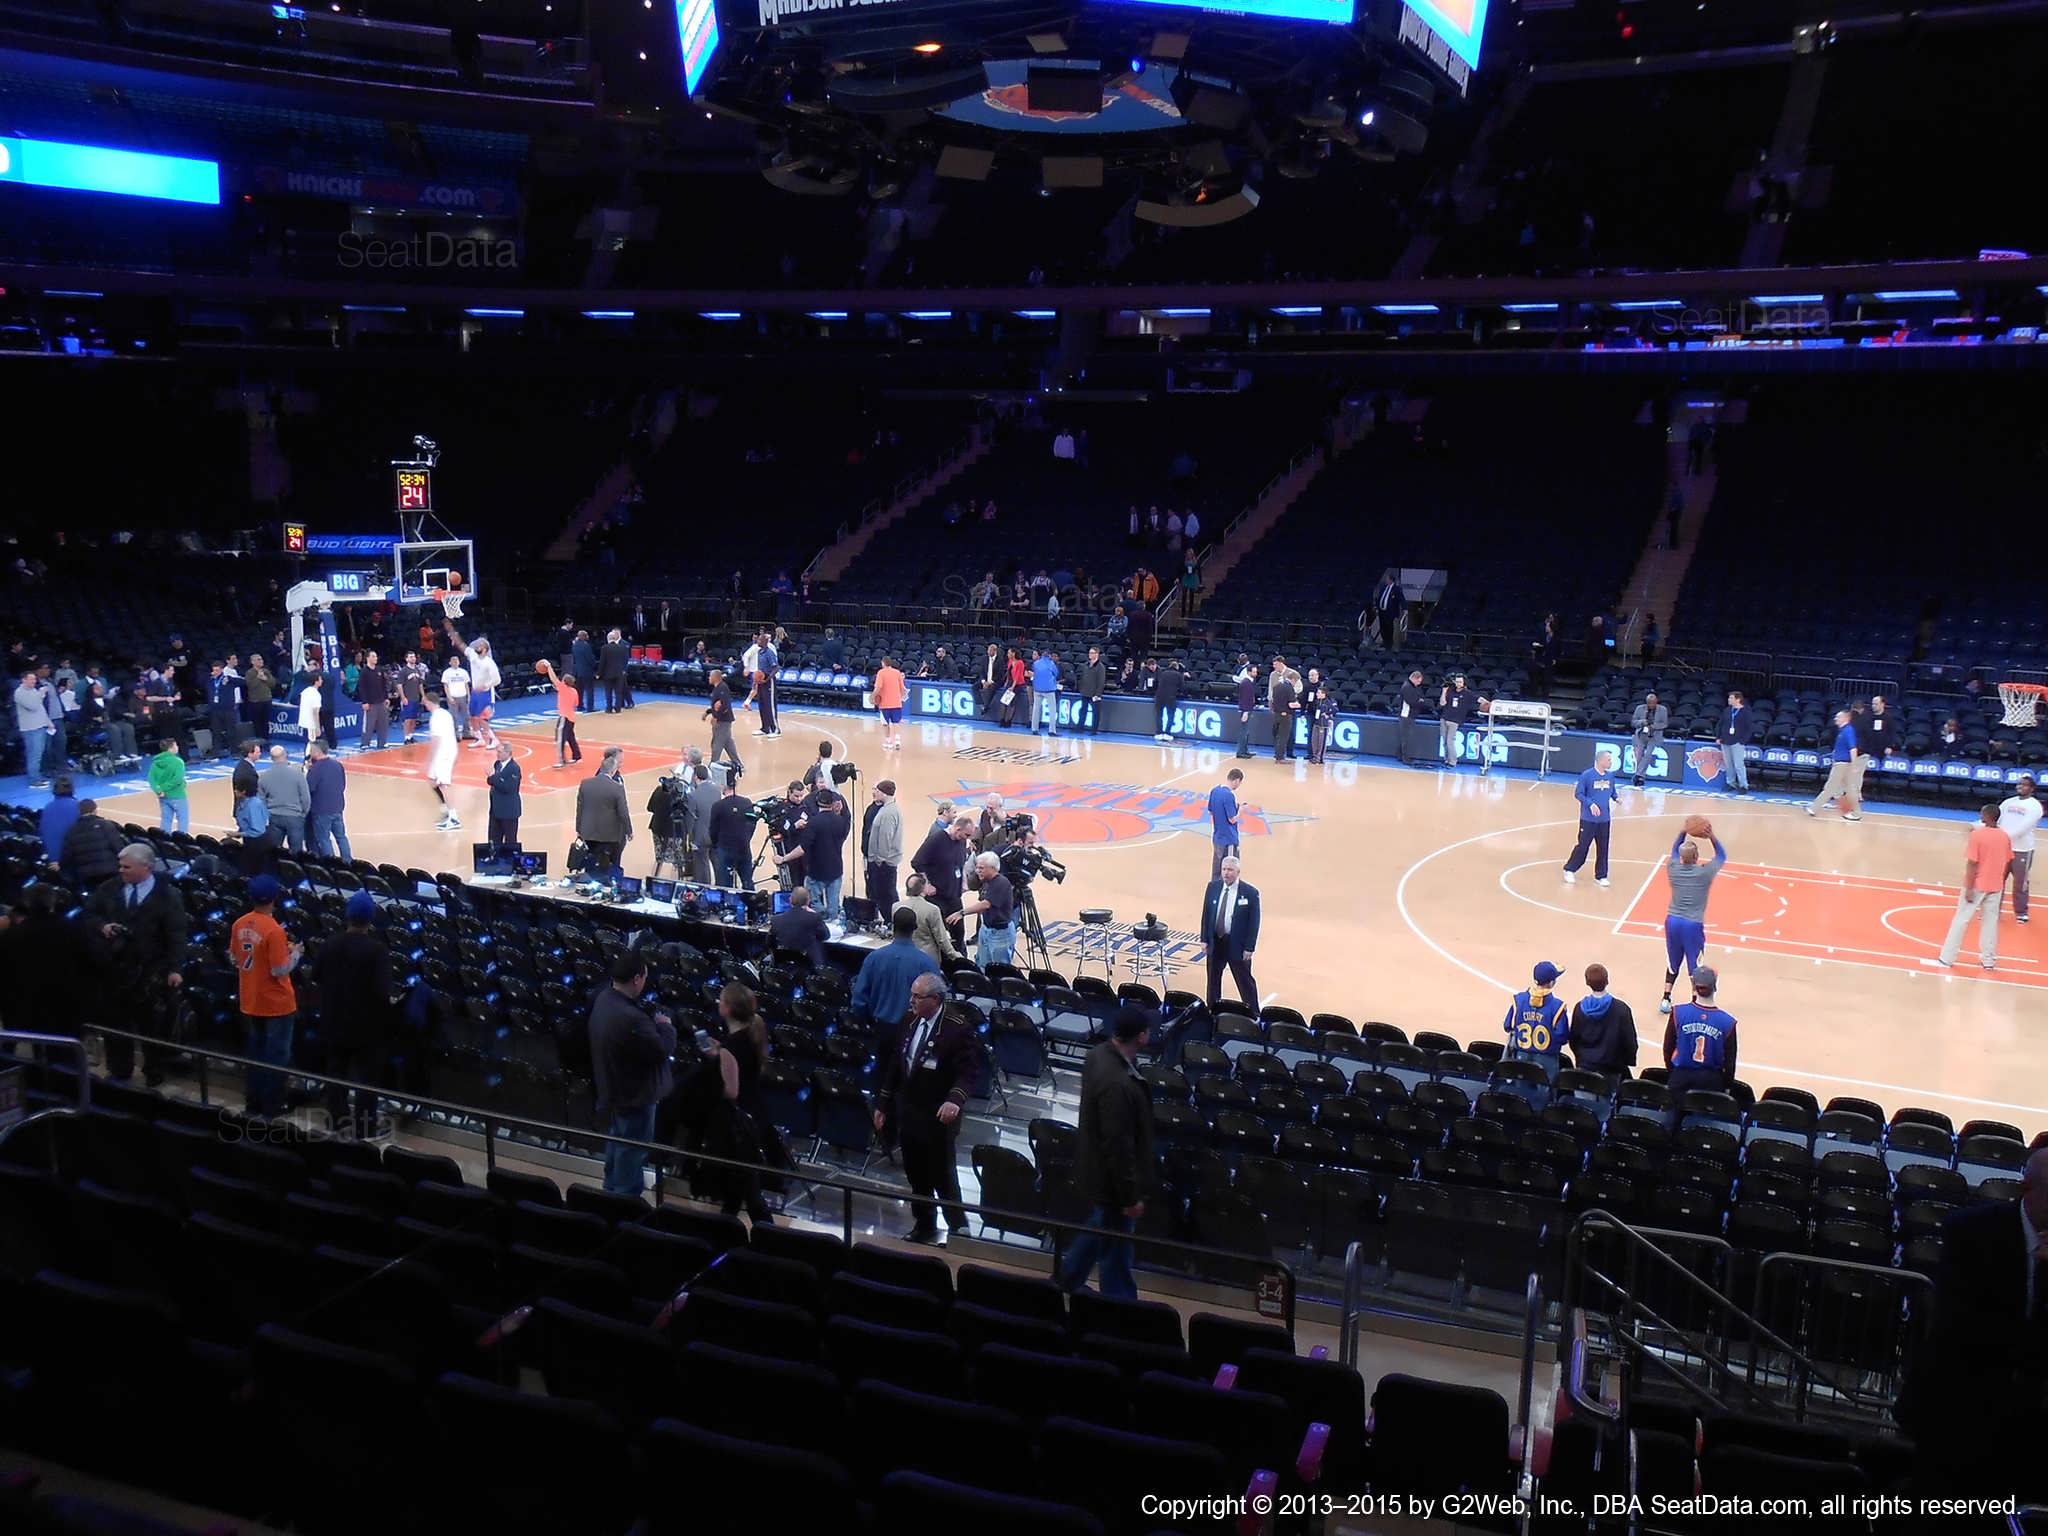 Seat view from section 118 at Madison Square Garden, home of the New York Knicks.